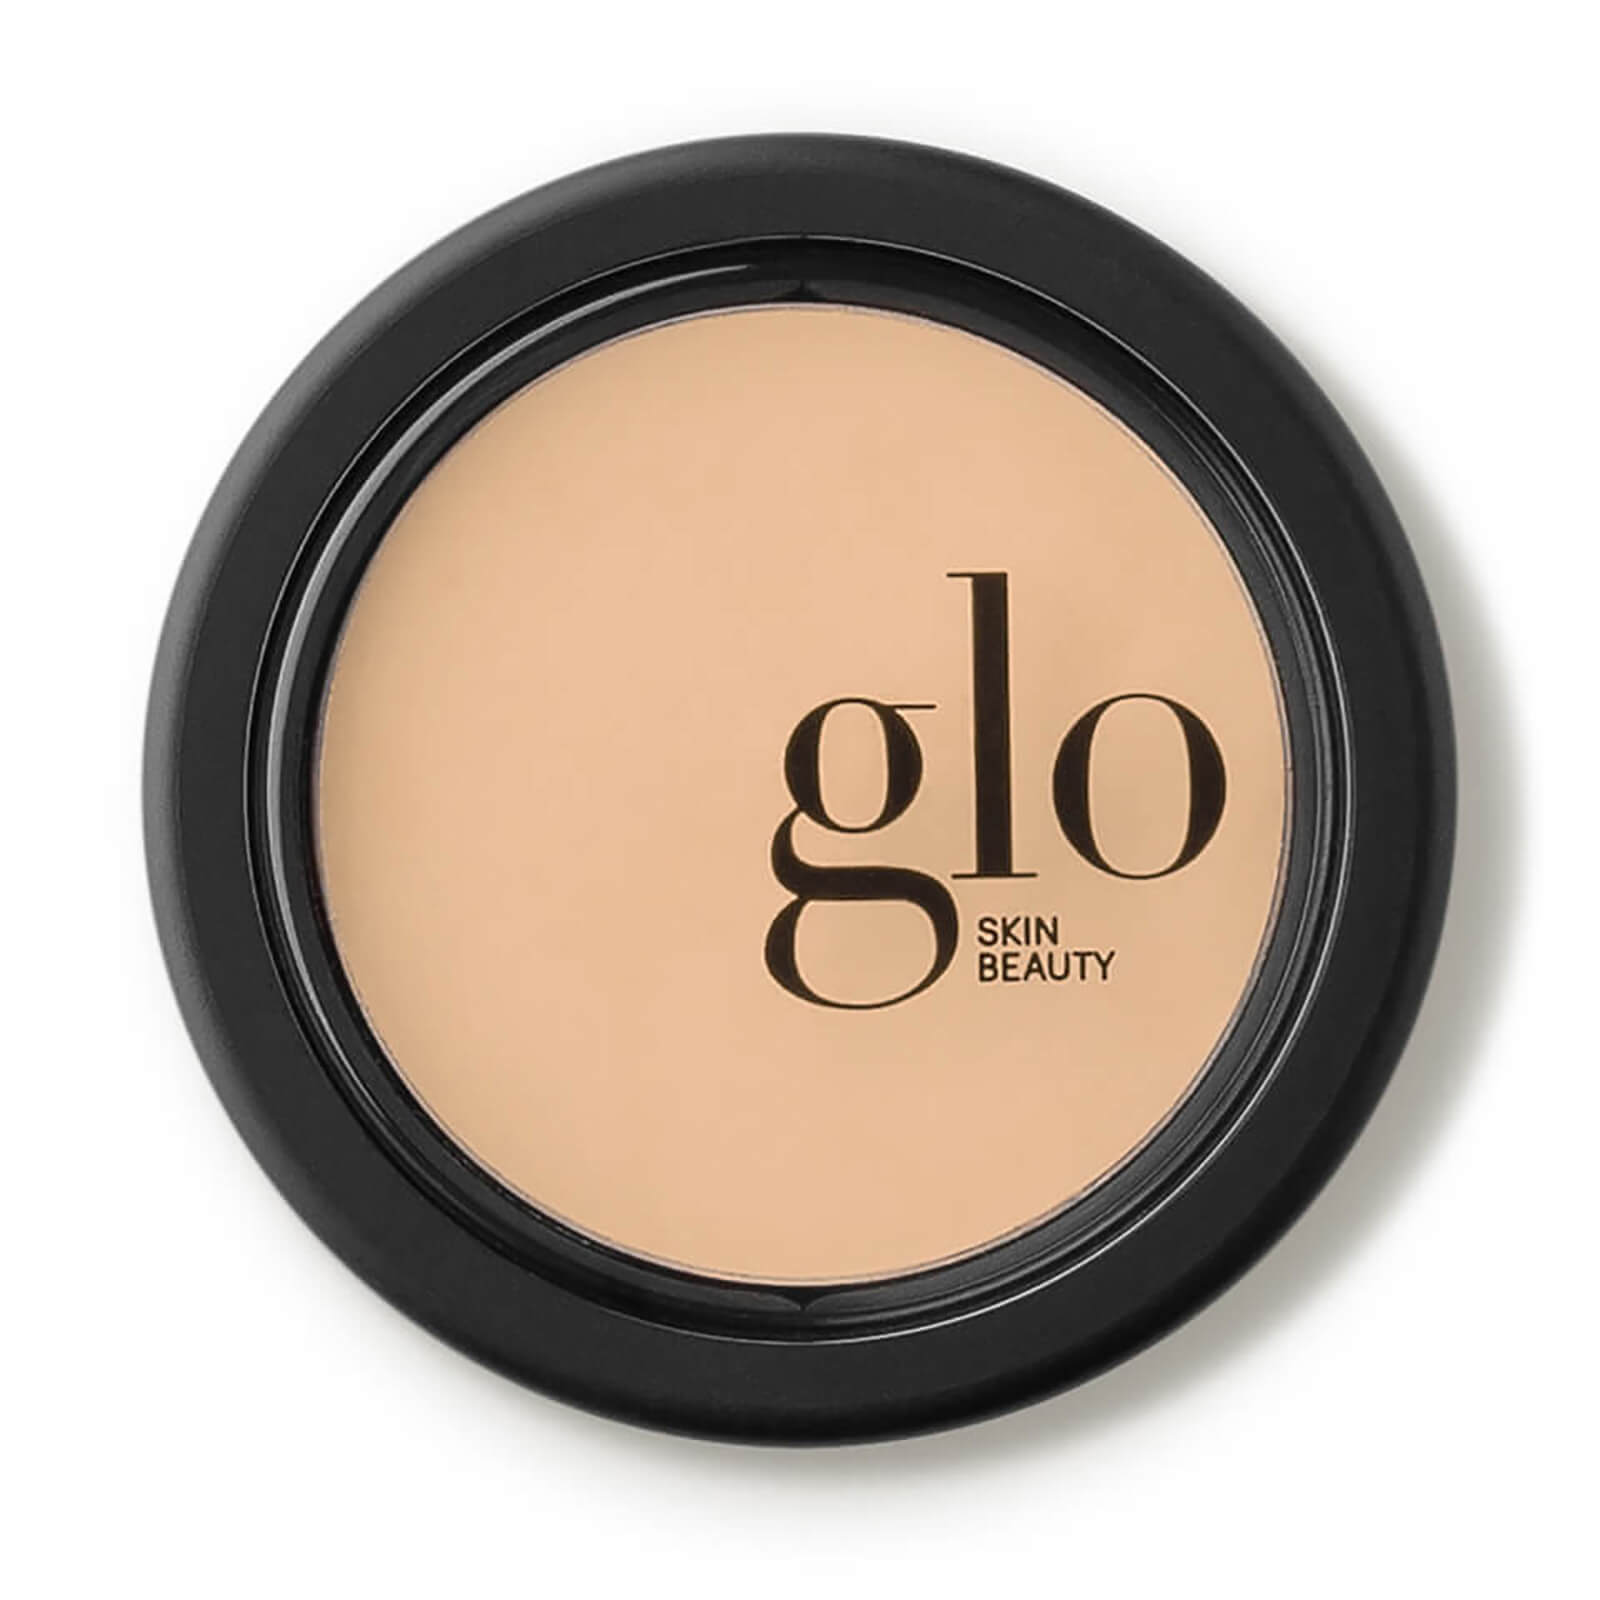 Glo Skin Beauty Oil-free Camouflage Concealer (0.11 Oz.) In Sand